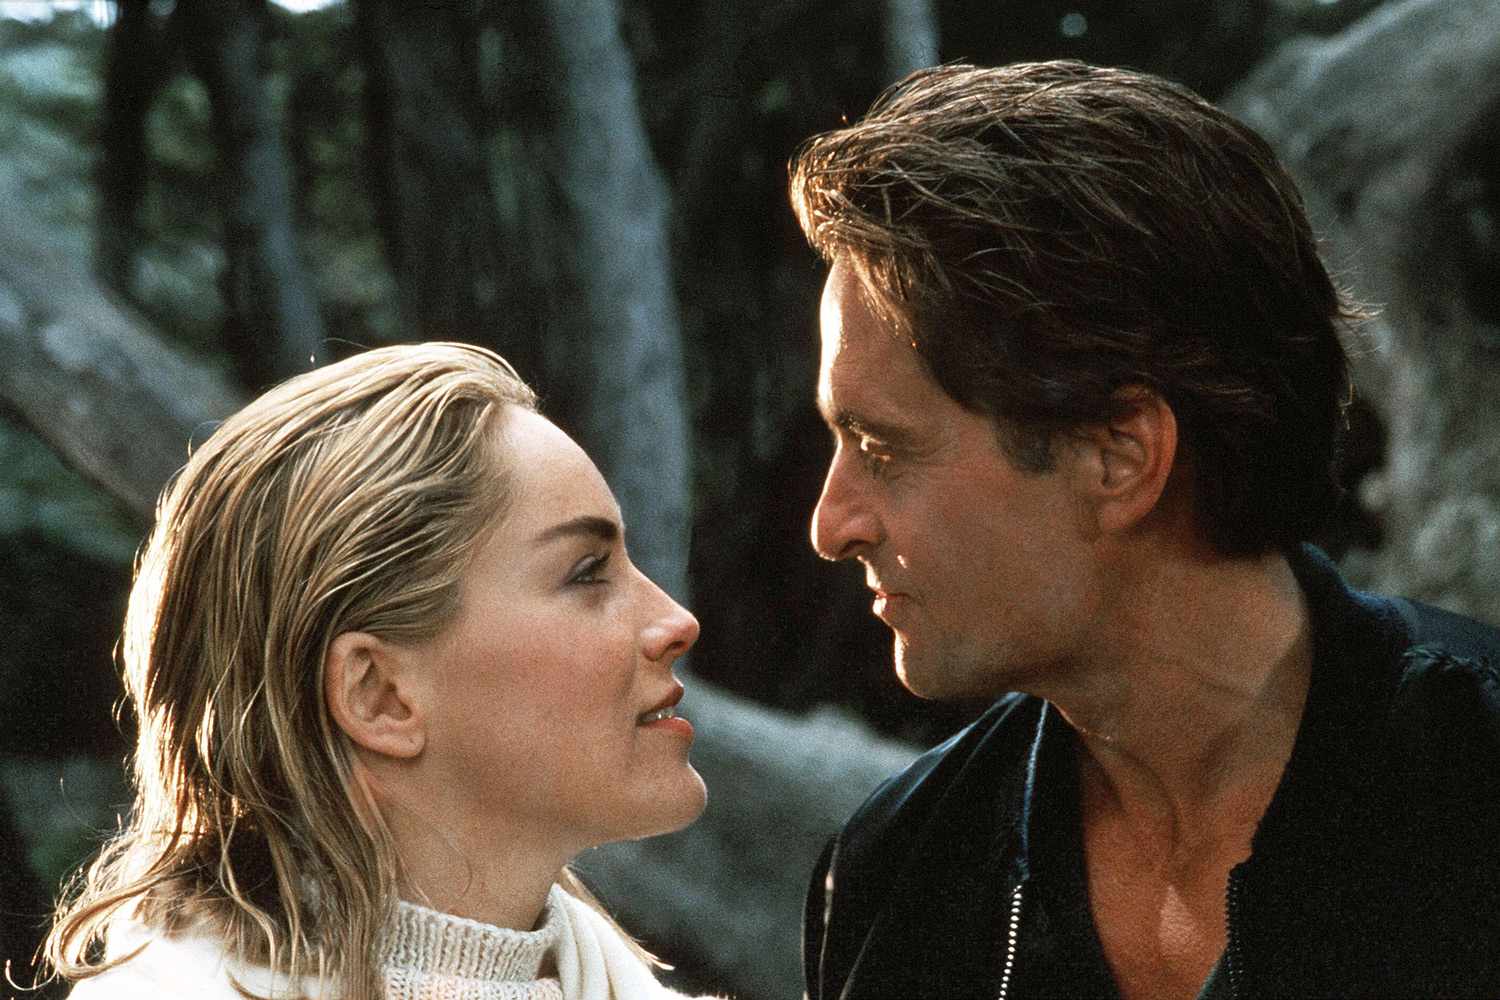 Michael Douglas and Sharon Stone in a still from Basic Instinct